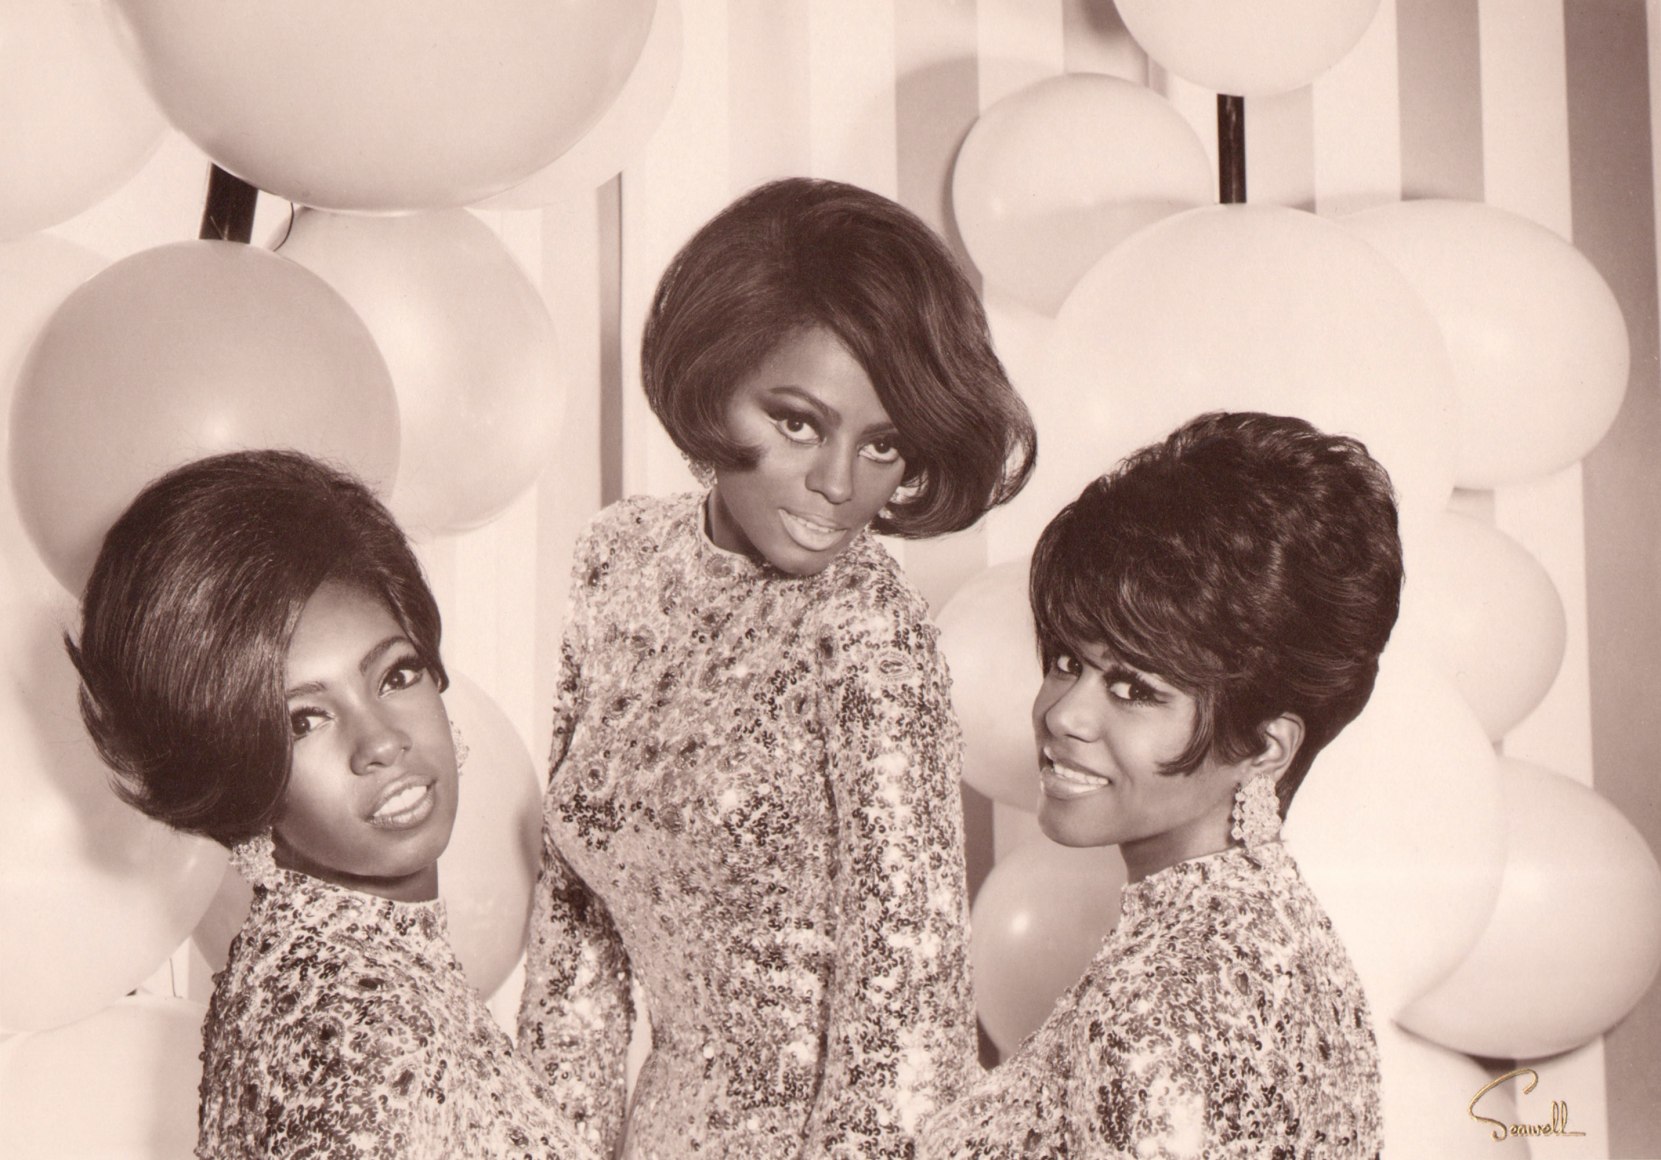 Wallace Seawell, Diana Ross &amp; The Supremes, ​1967. The three subjects pose in sparkling dresses against a striped wall with white balloons.